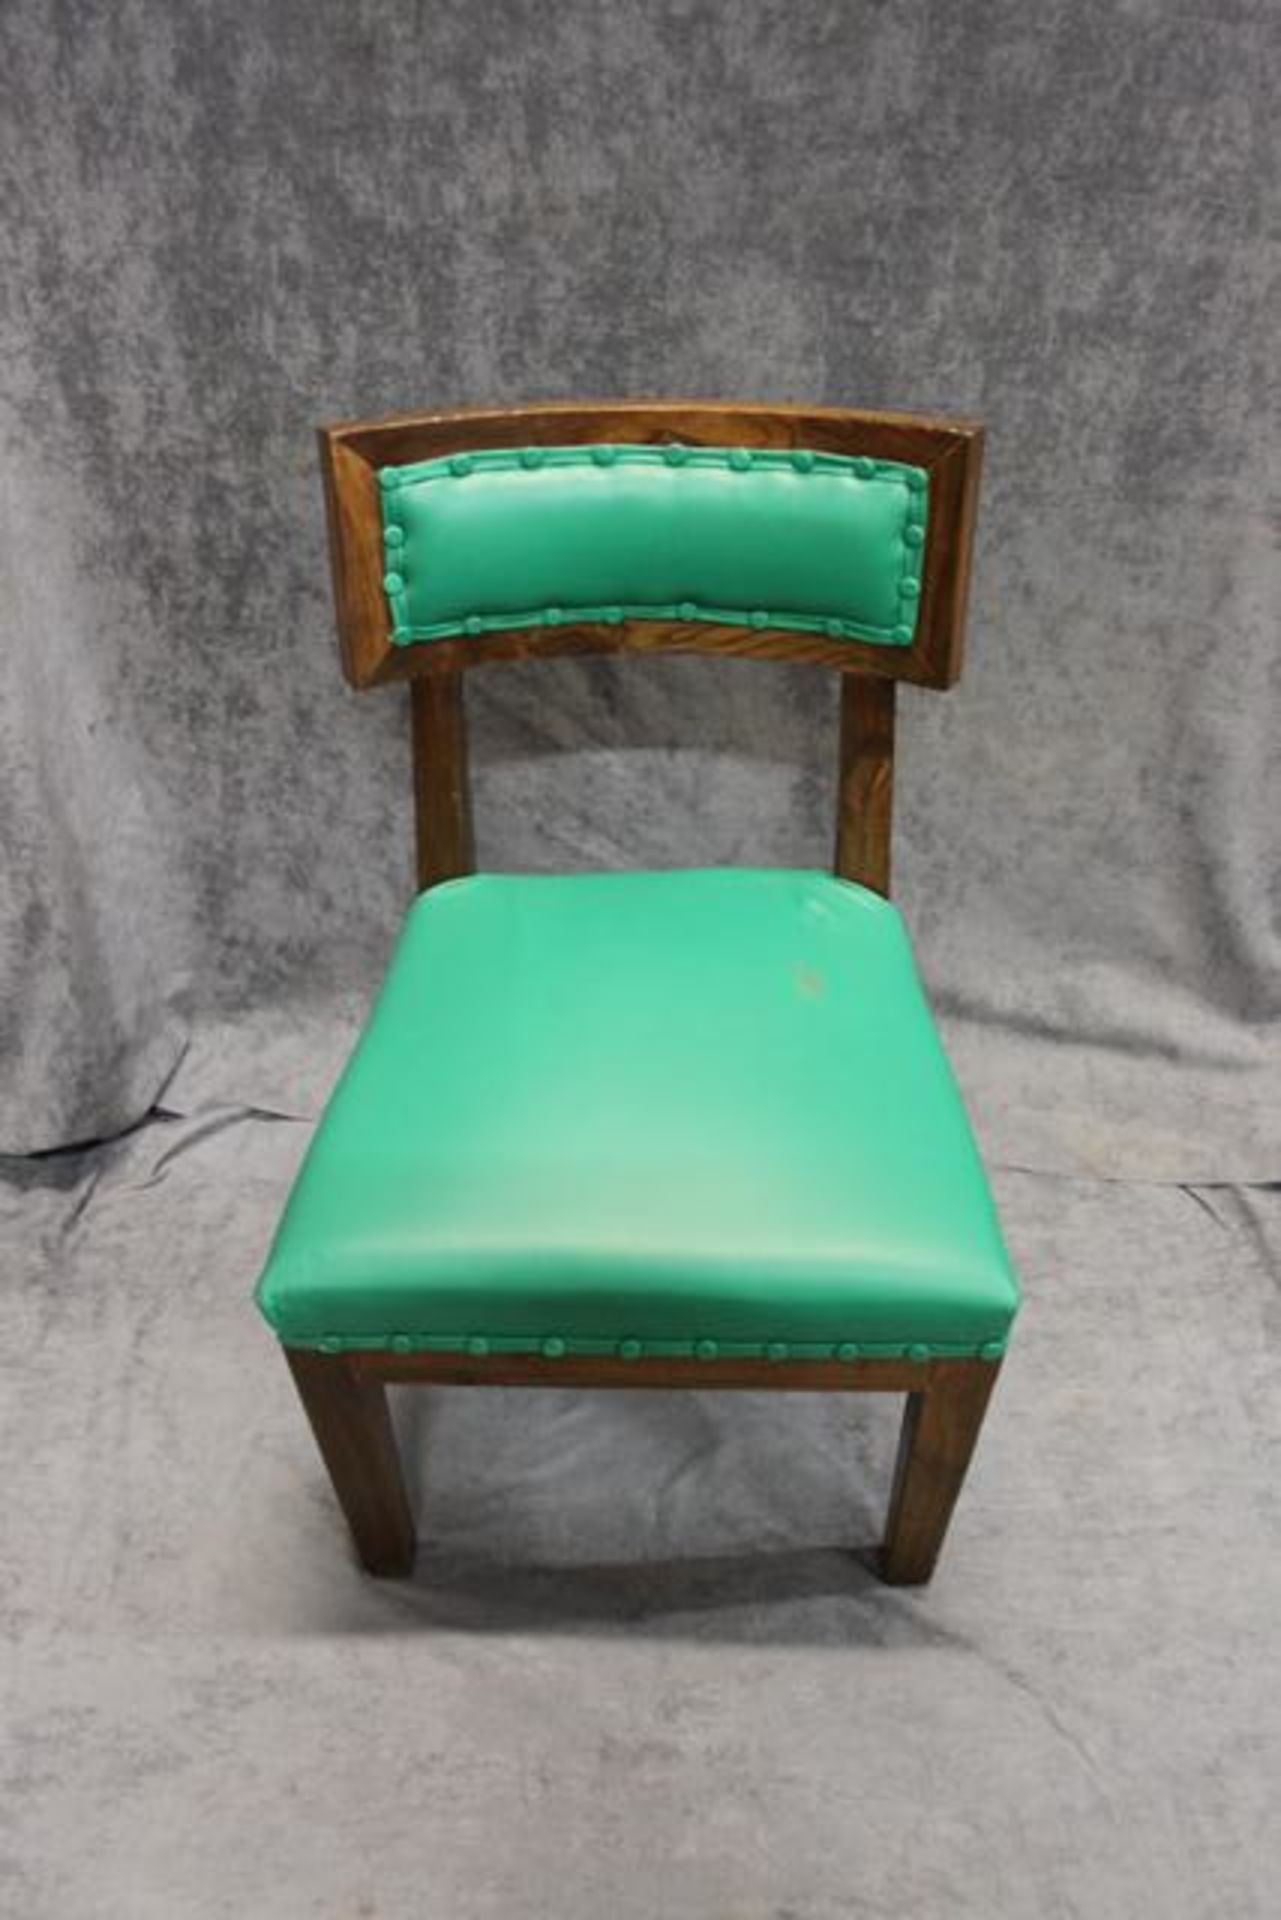 A set of 4 contemporary green bonded leather dining chairs hardwood polished walnut finish frame